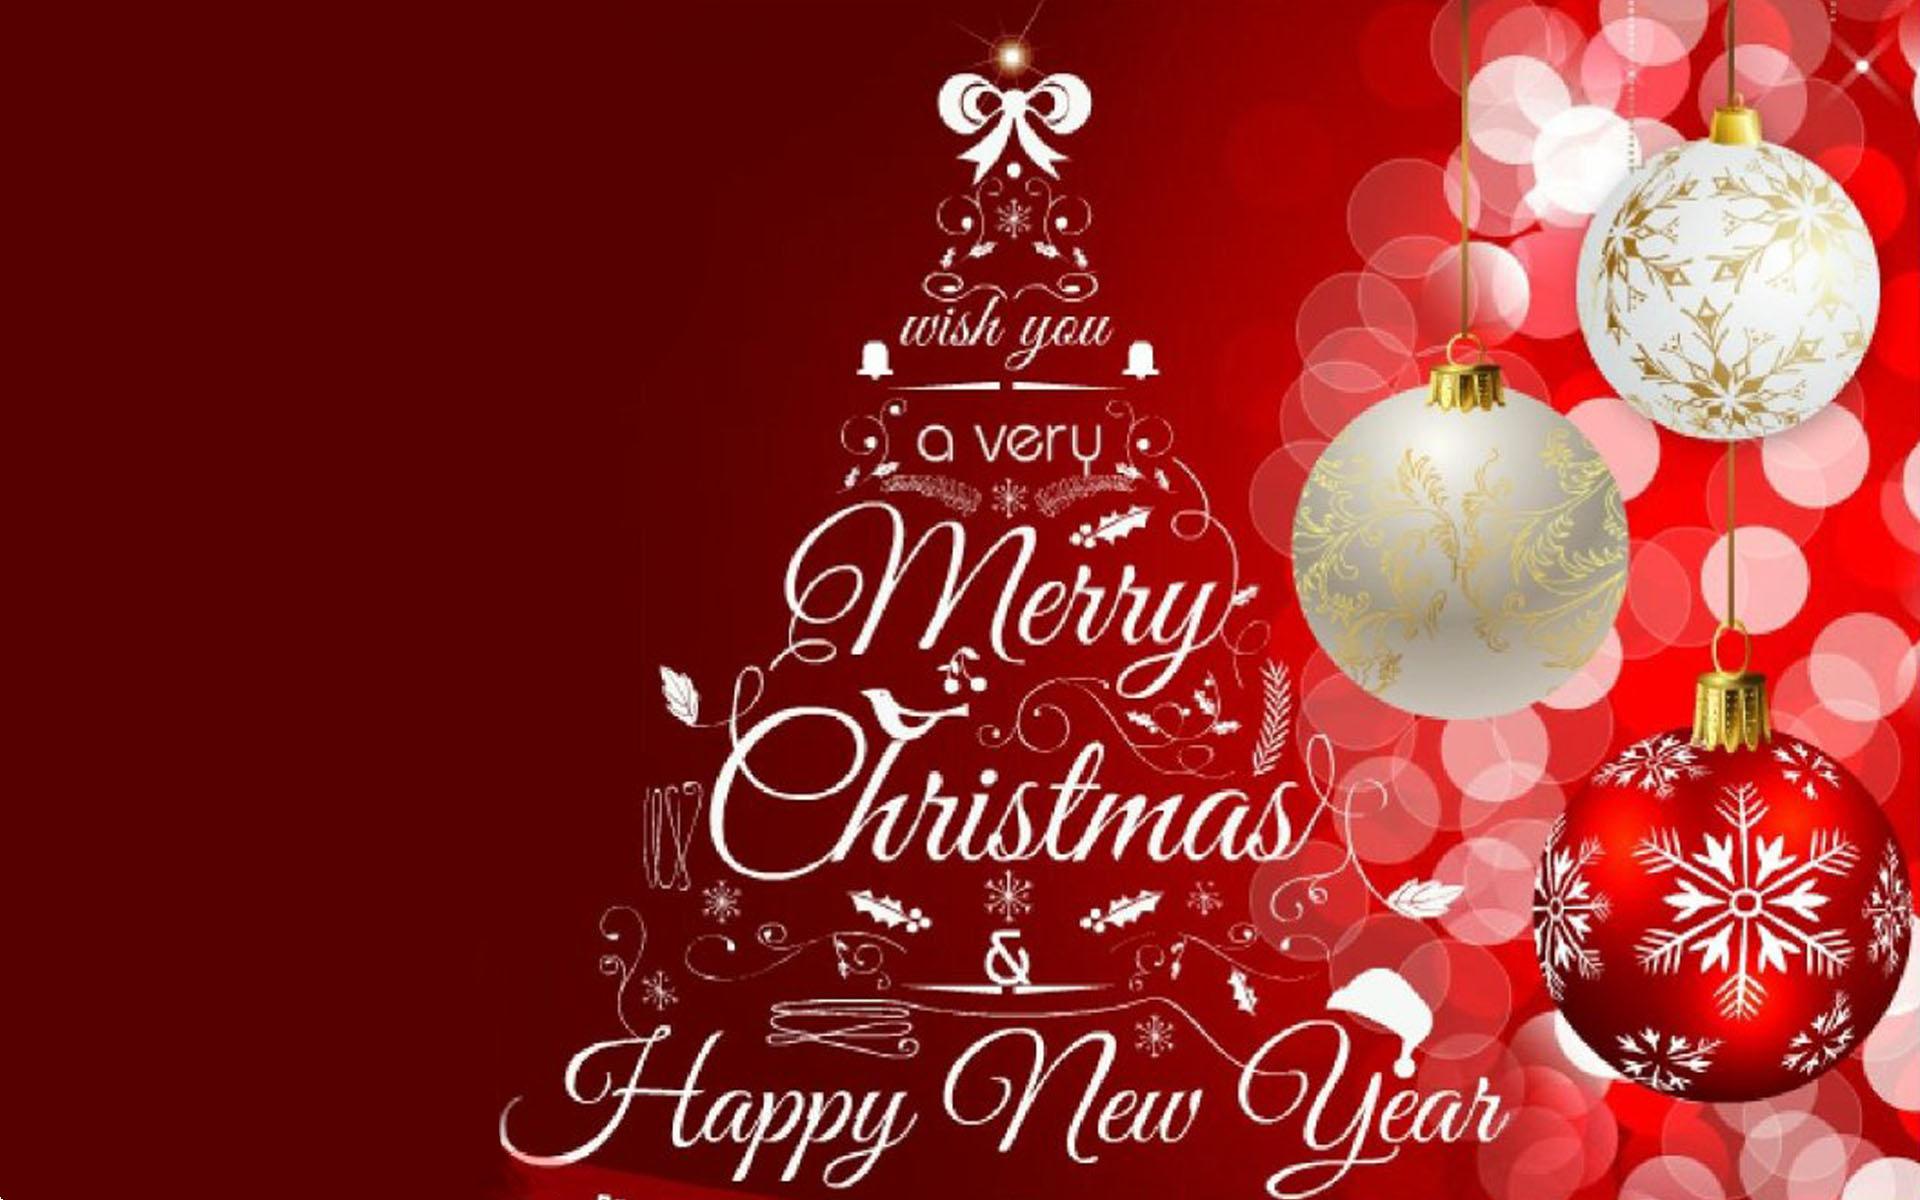 Greeting Card Merry Christmas And Happy New Year 2020 Image